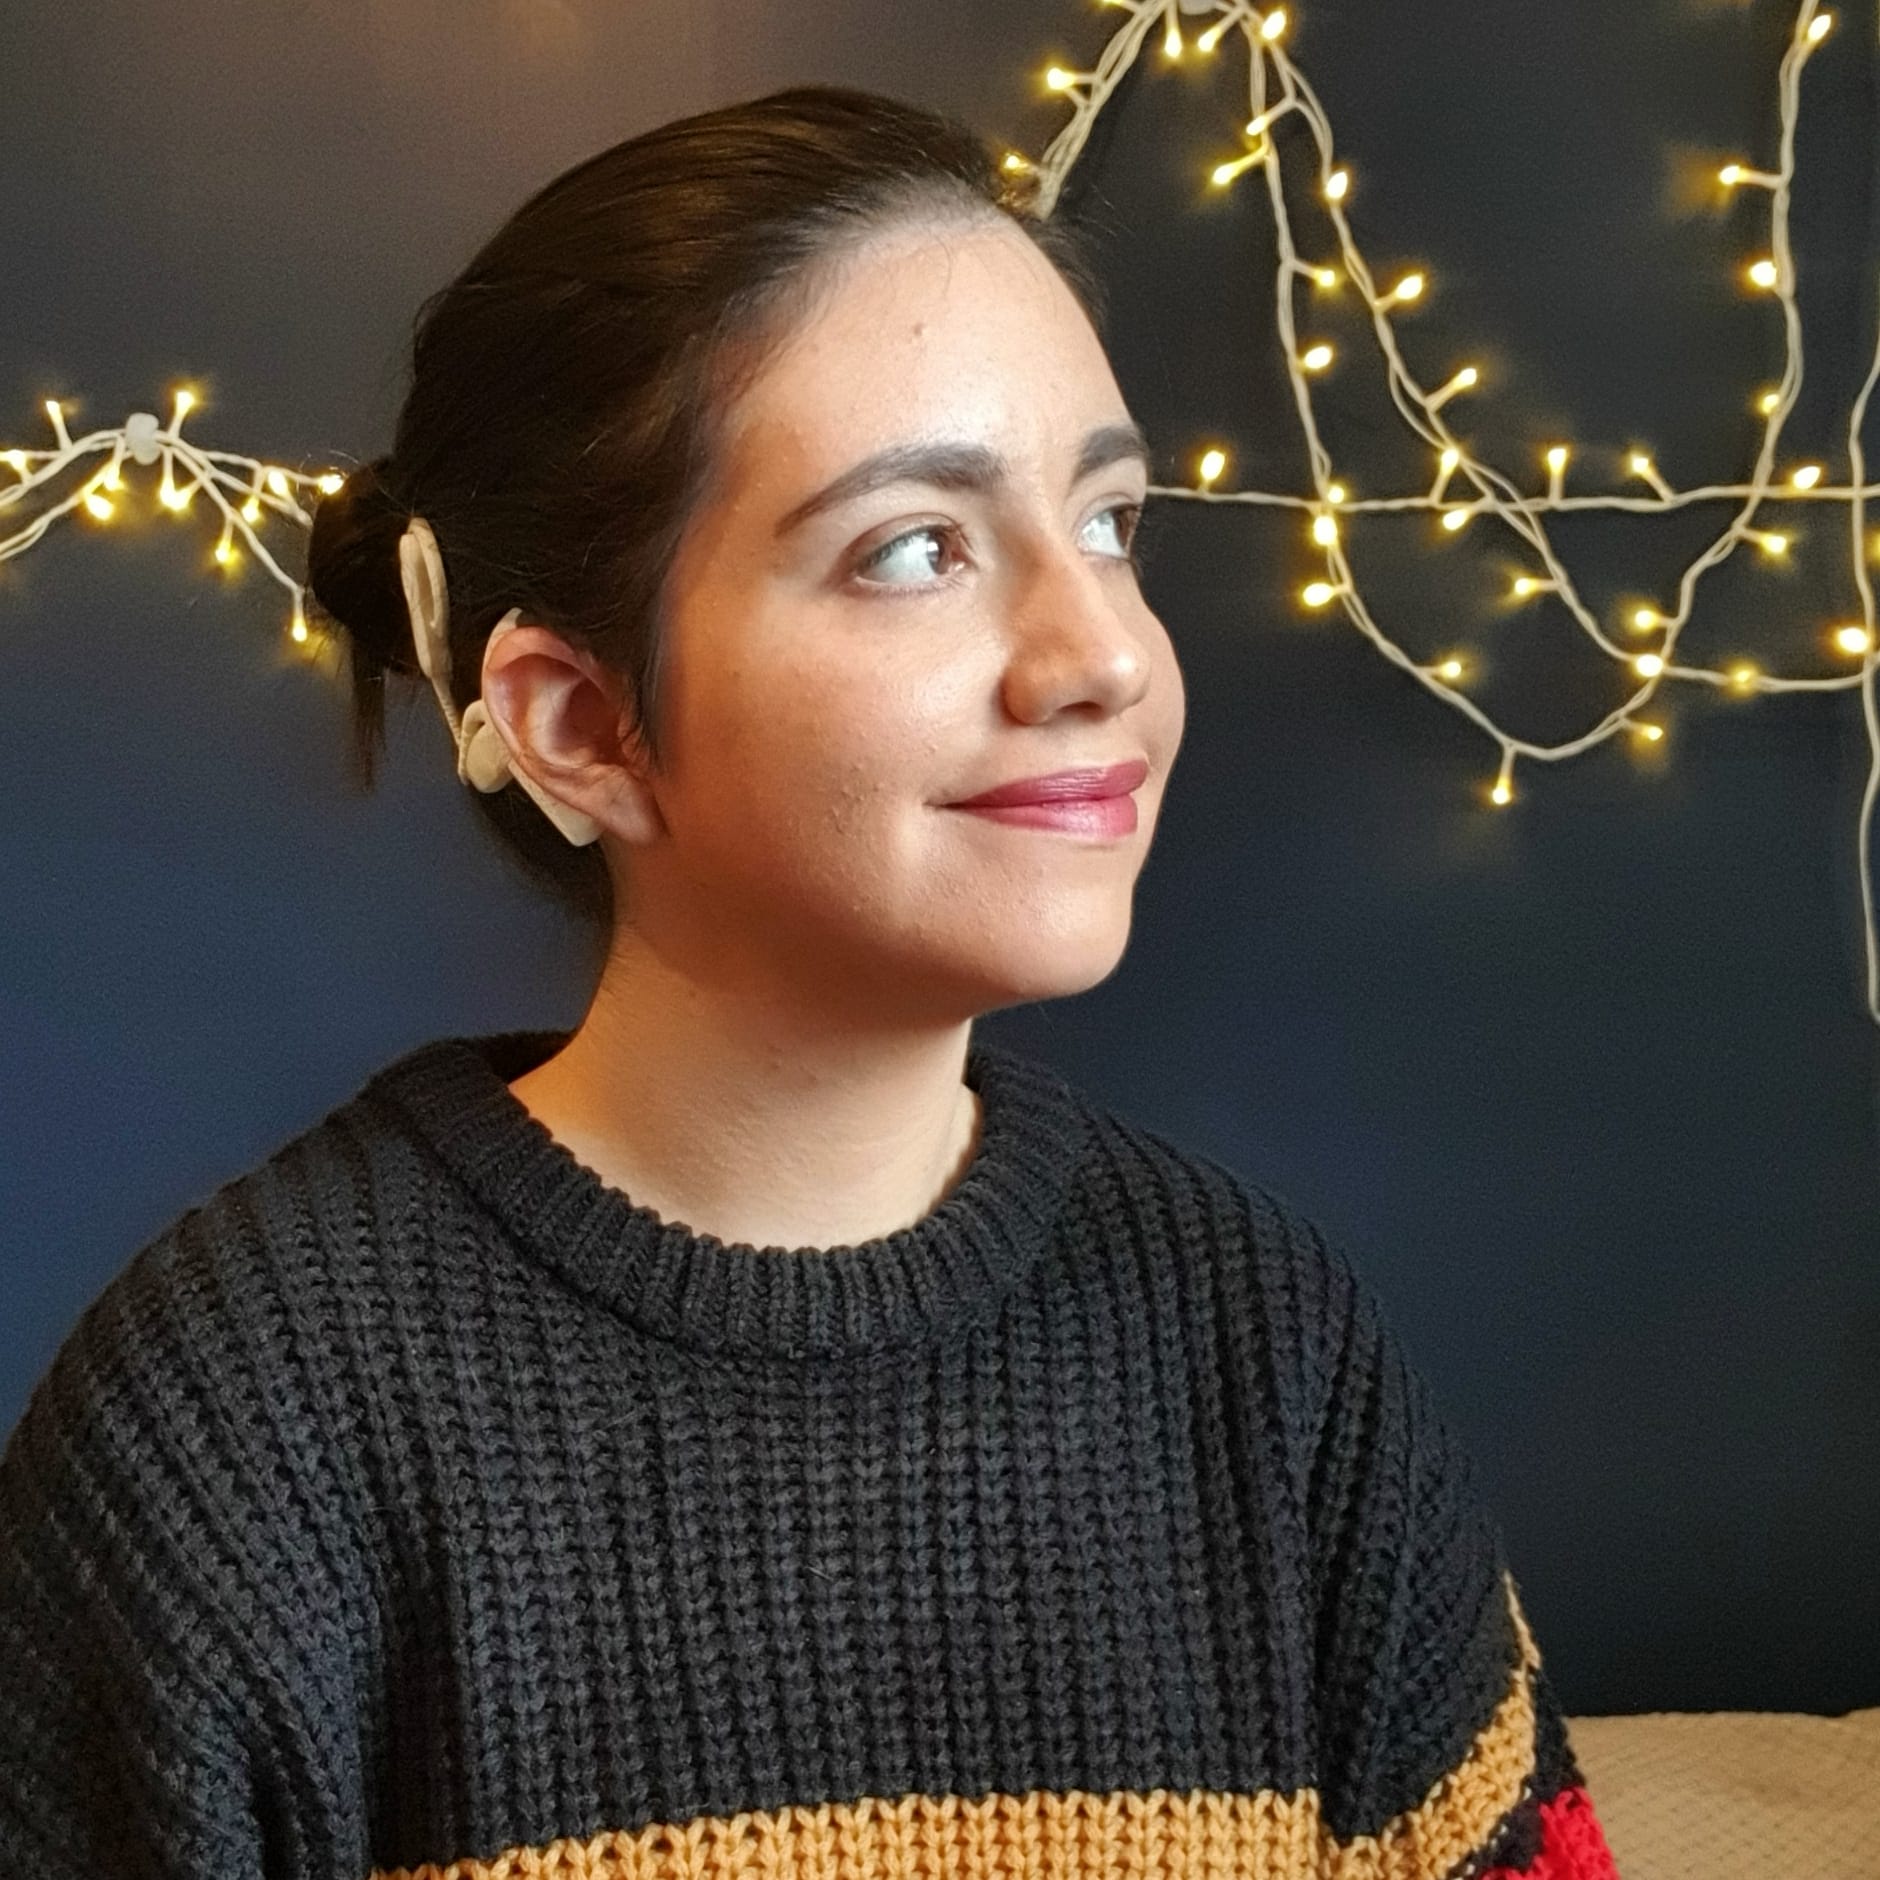 Gabriella is a young lady with dark hair, who sits in front of a blue wall with fairy lights. Her hair is tucked behind her ear, showing her cochlear implant.